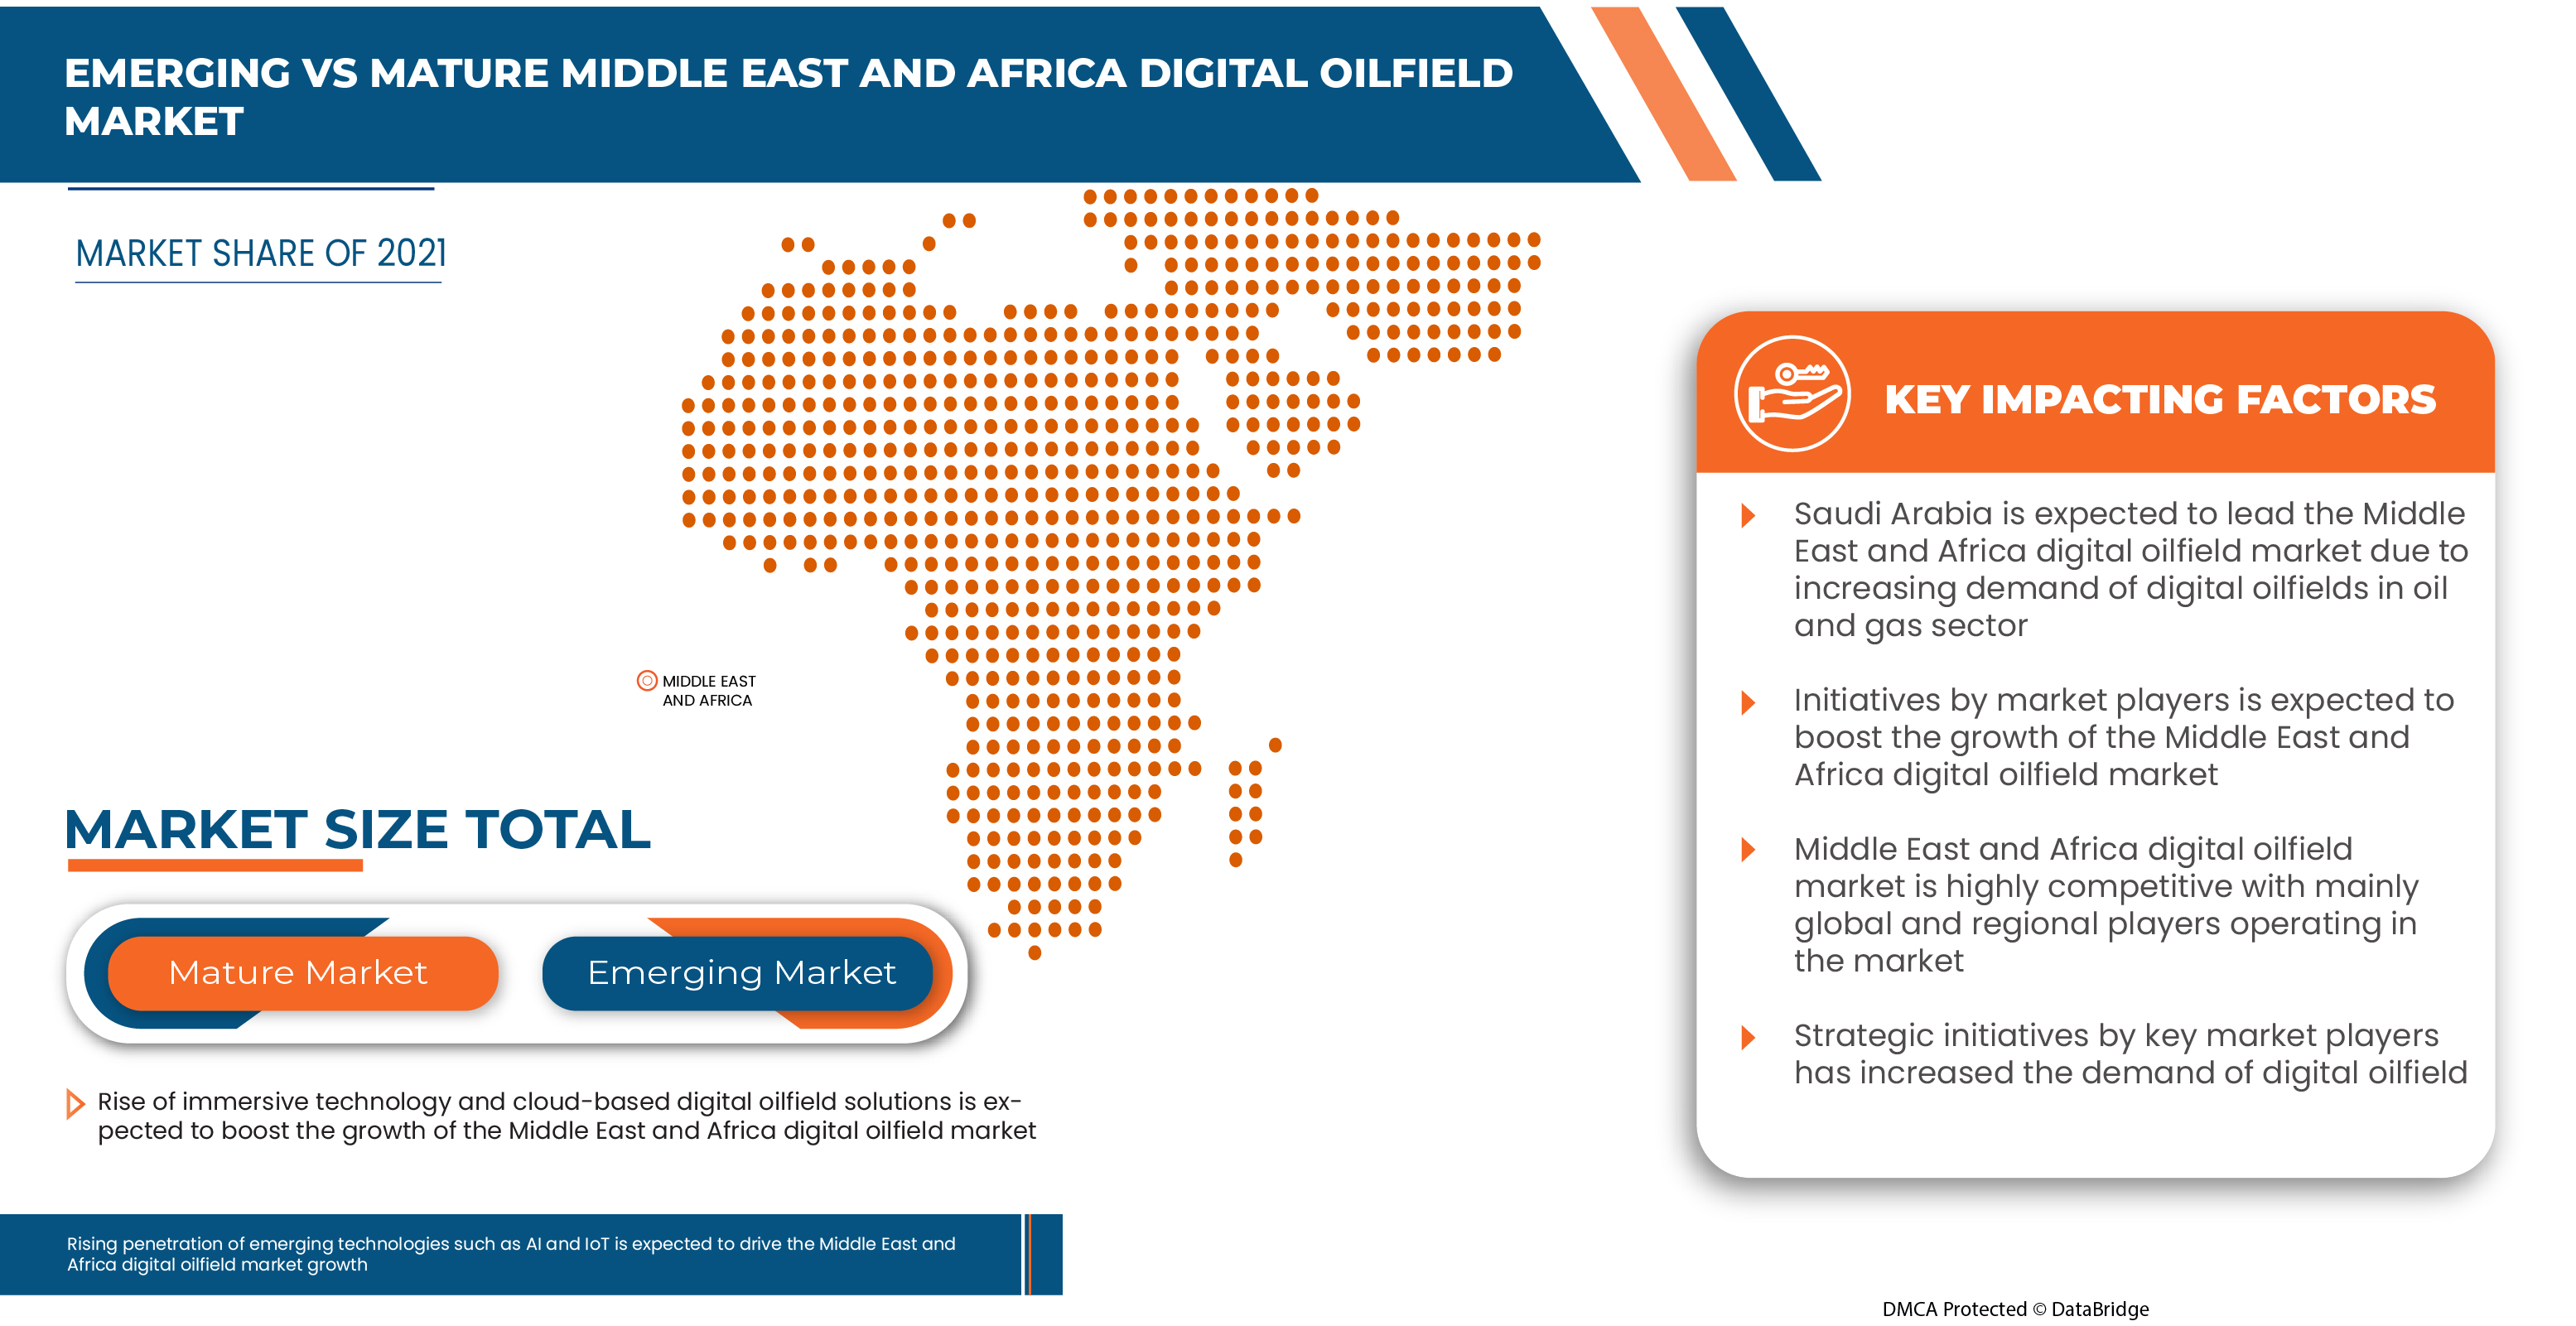 Middle East and Africa Digital Oilfield Market